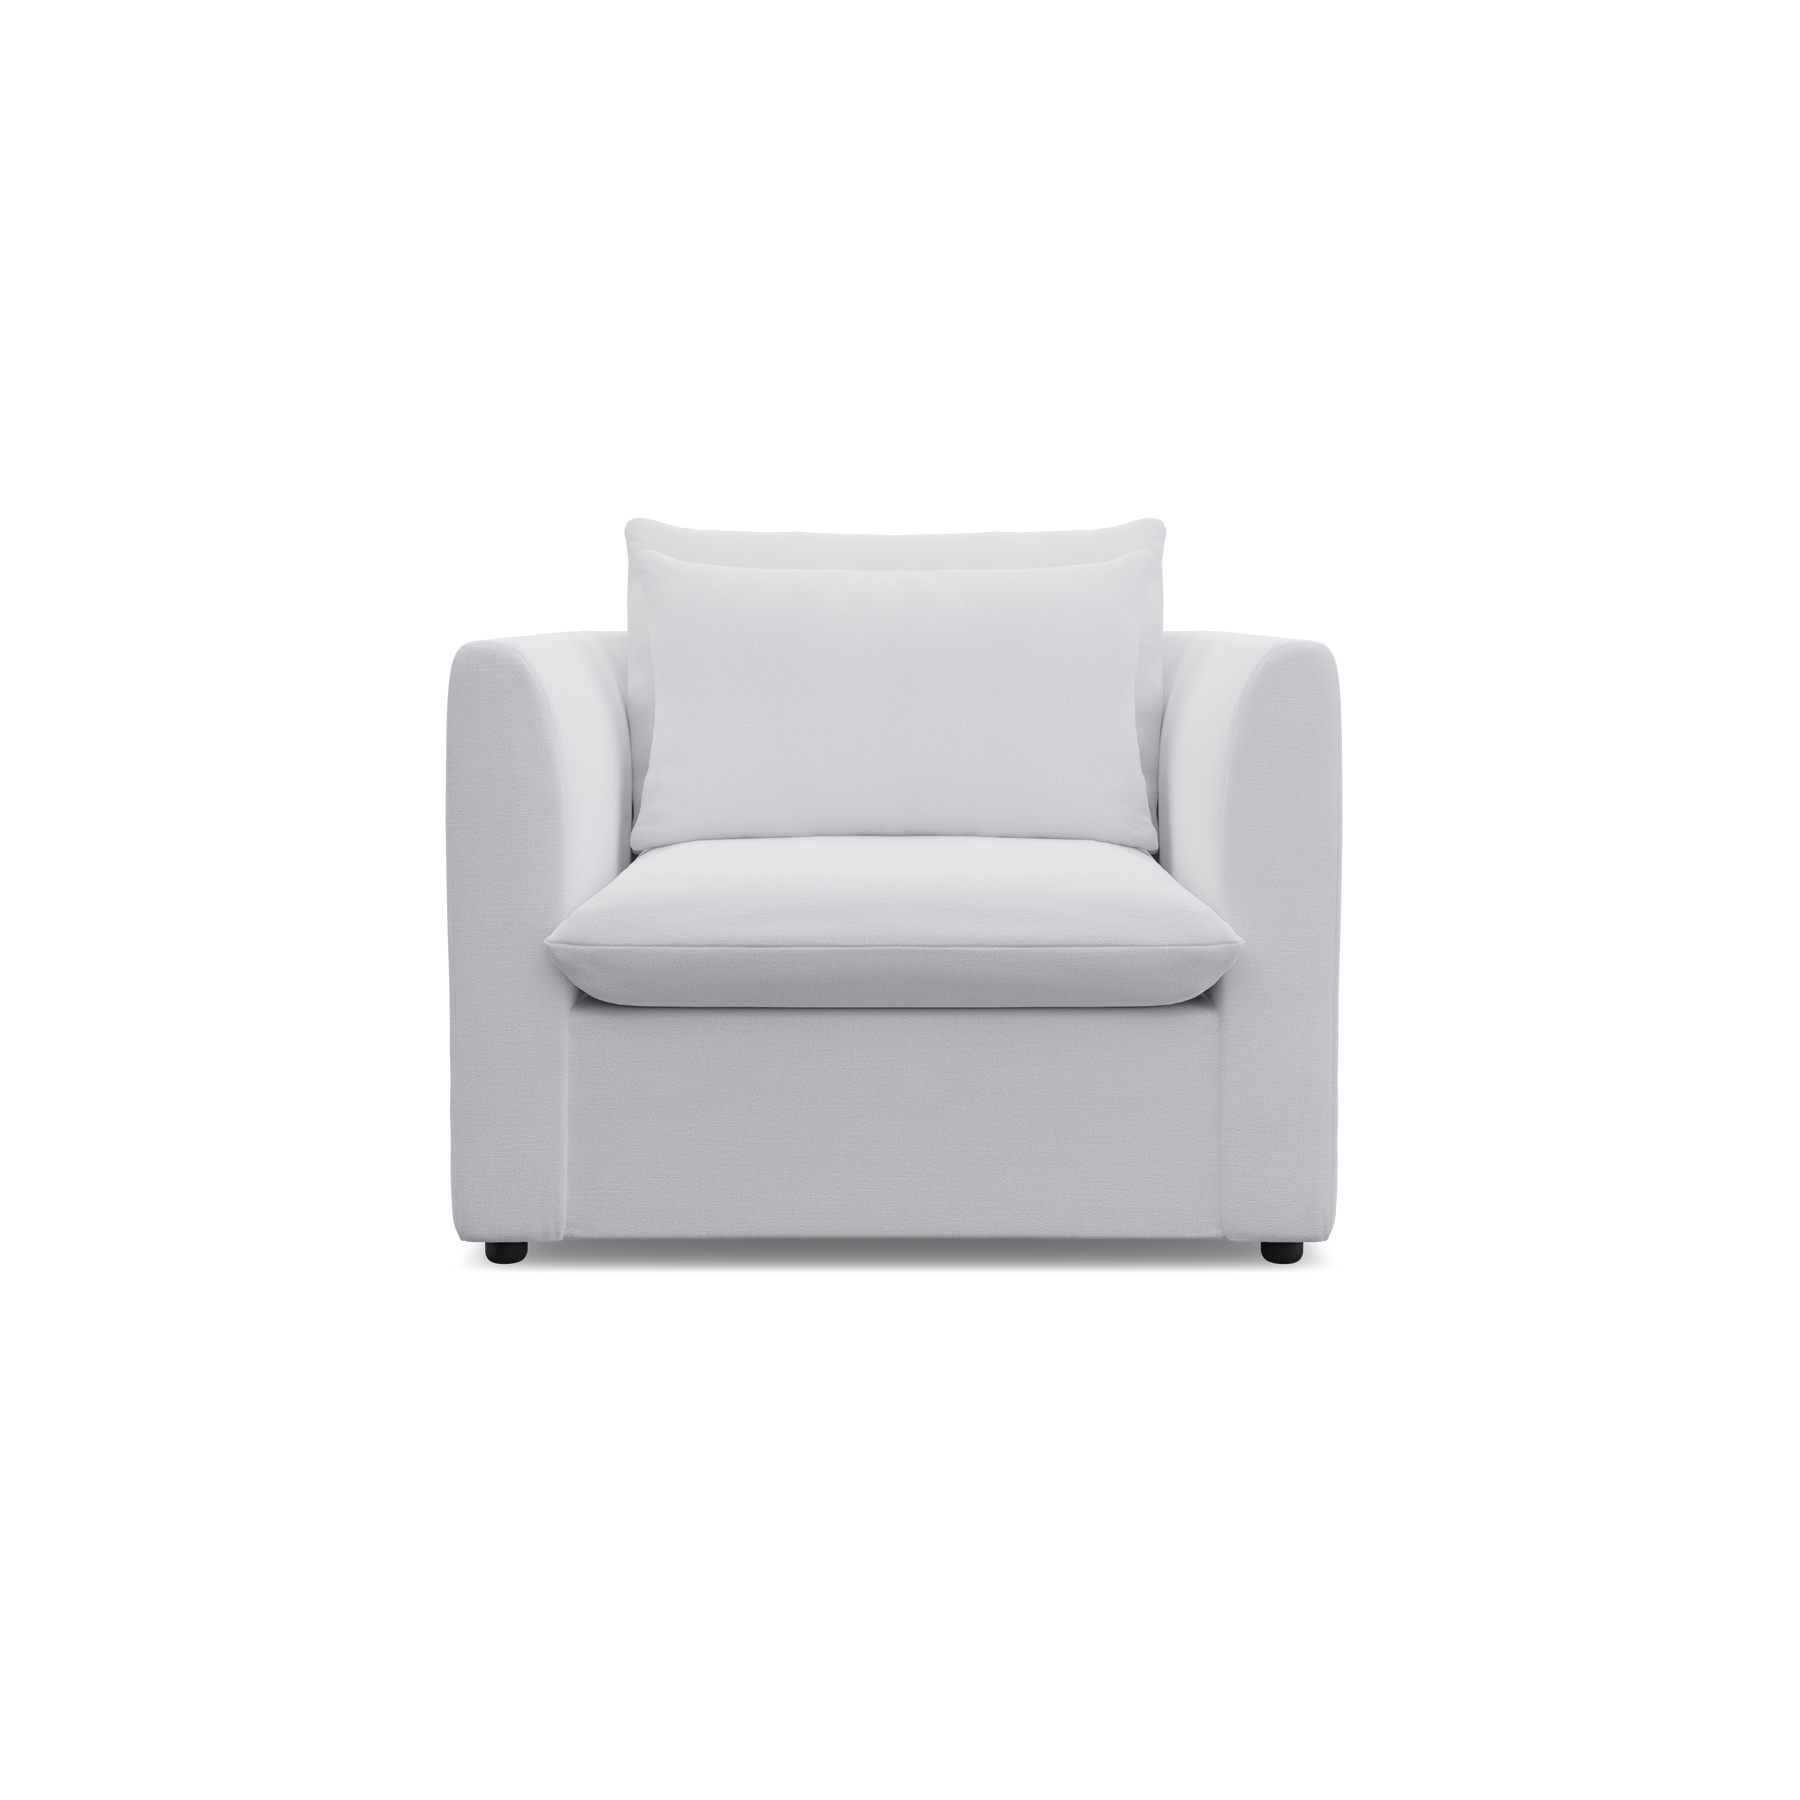 Lira Luxe Occasional Chair